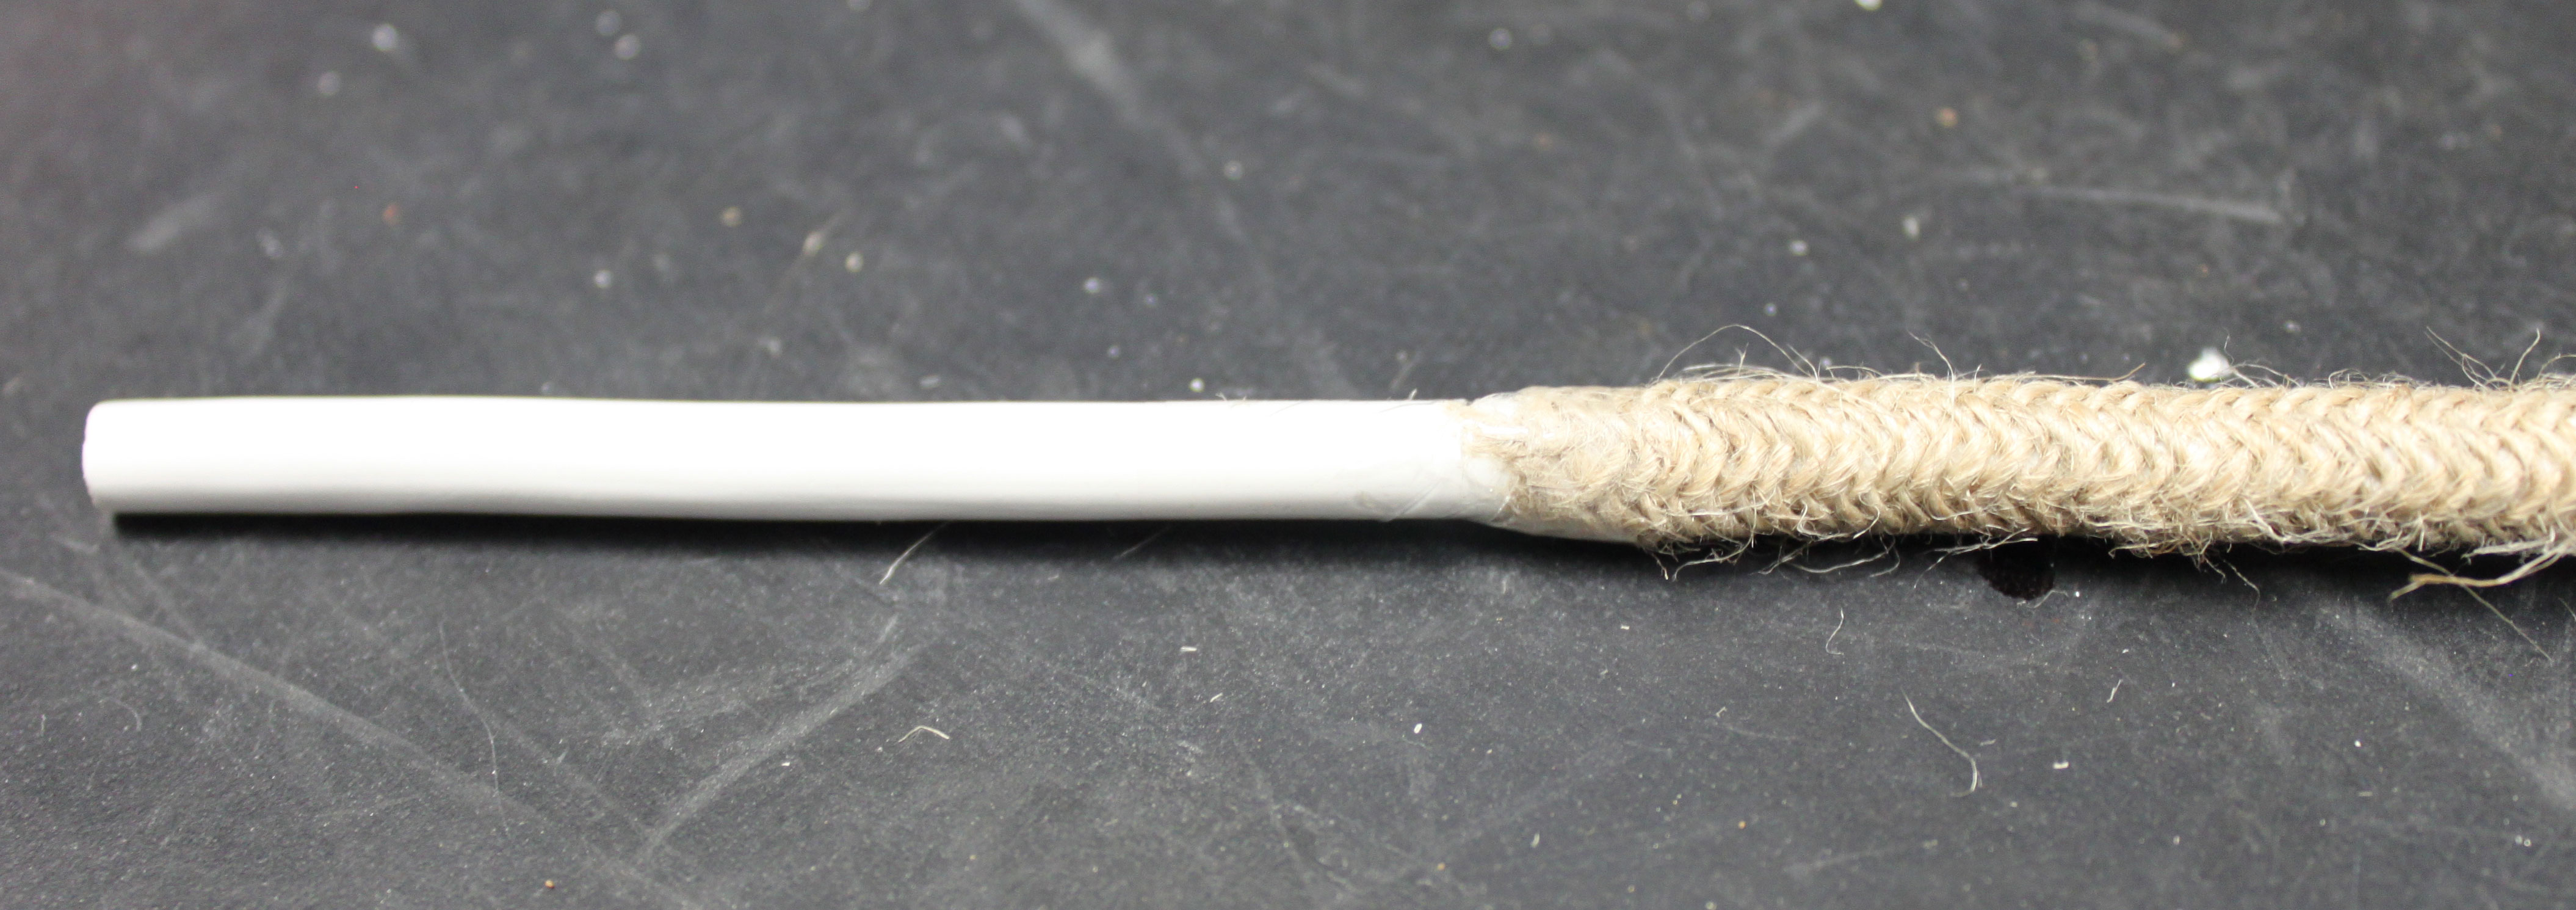 stripped-cable-with-sellotape.jpg